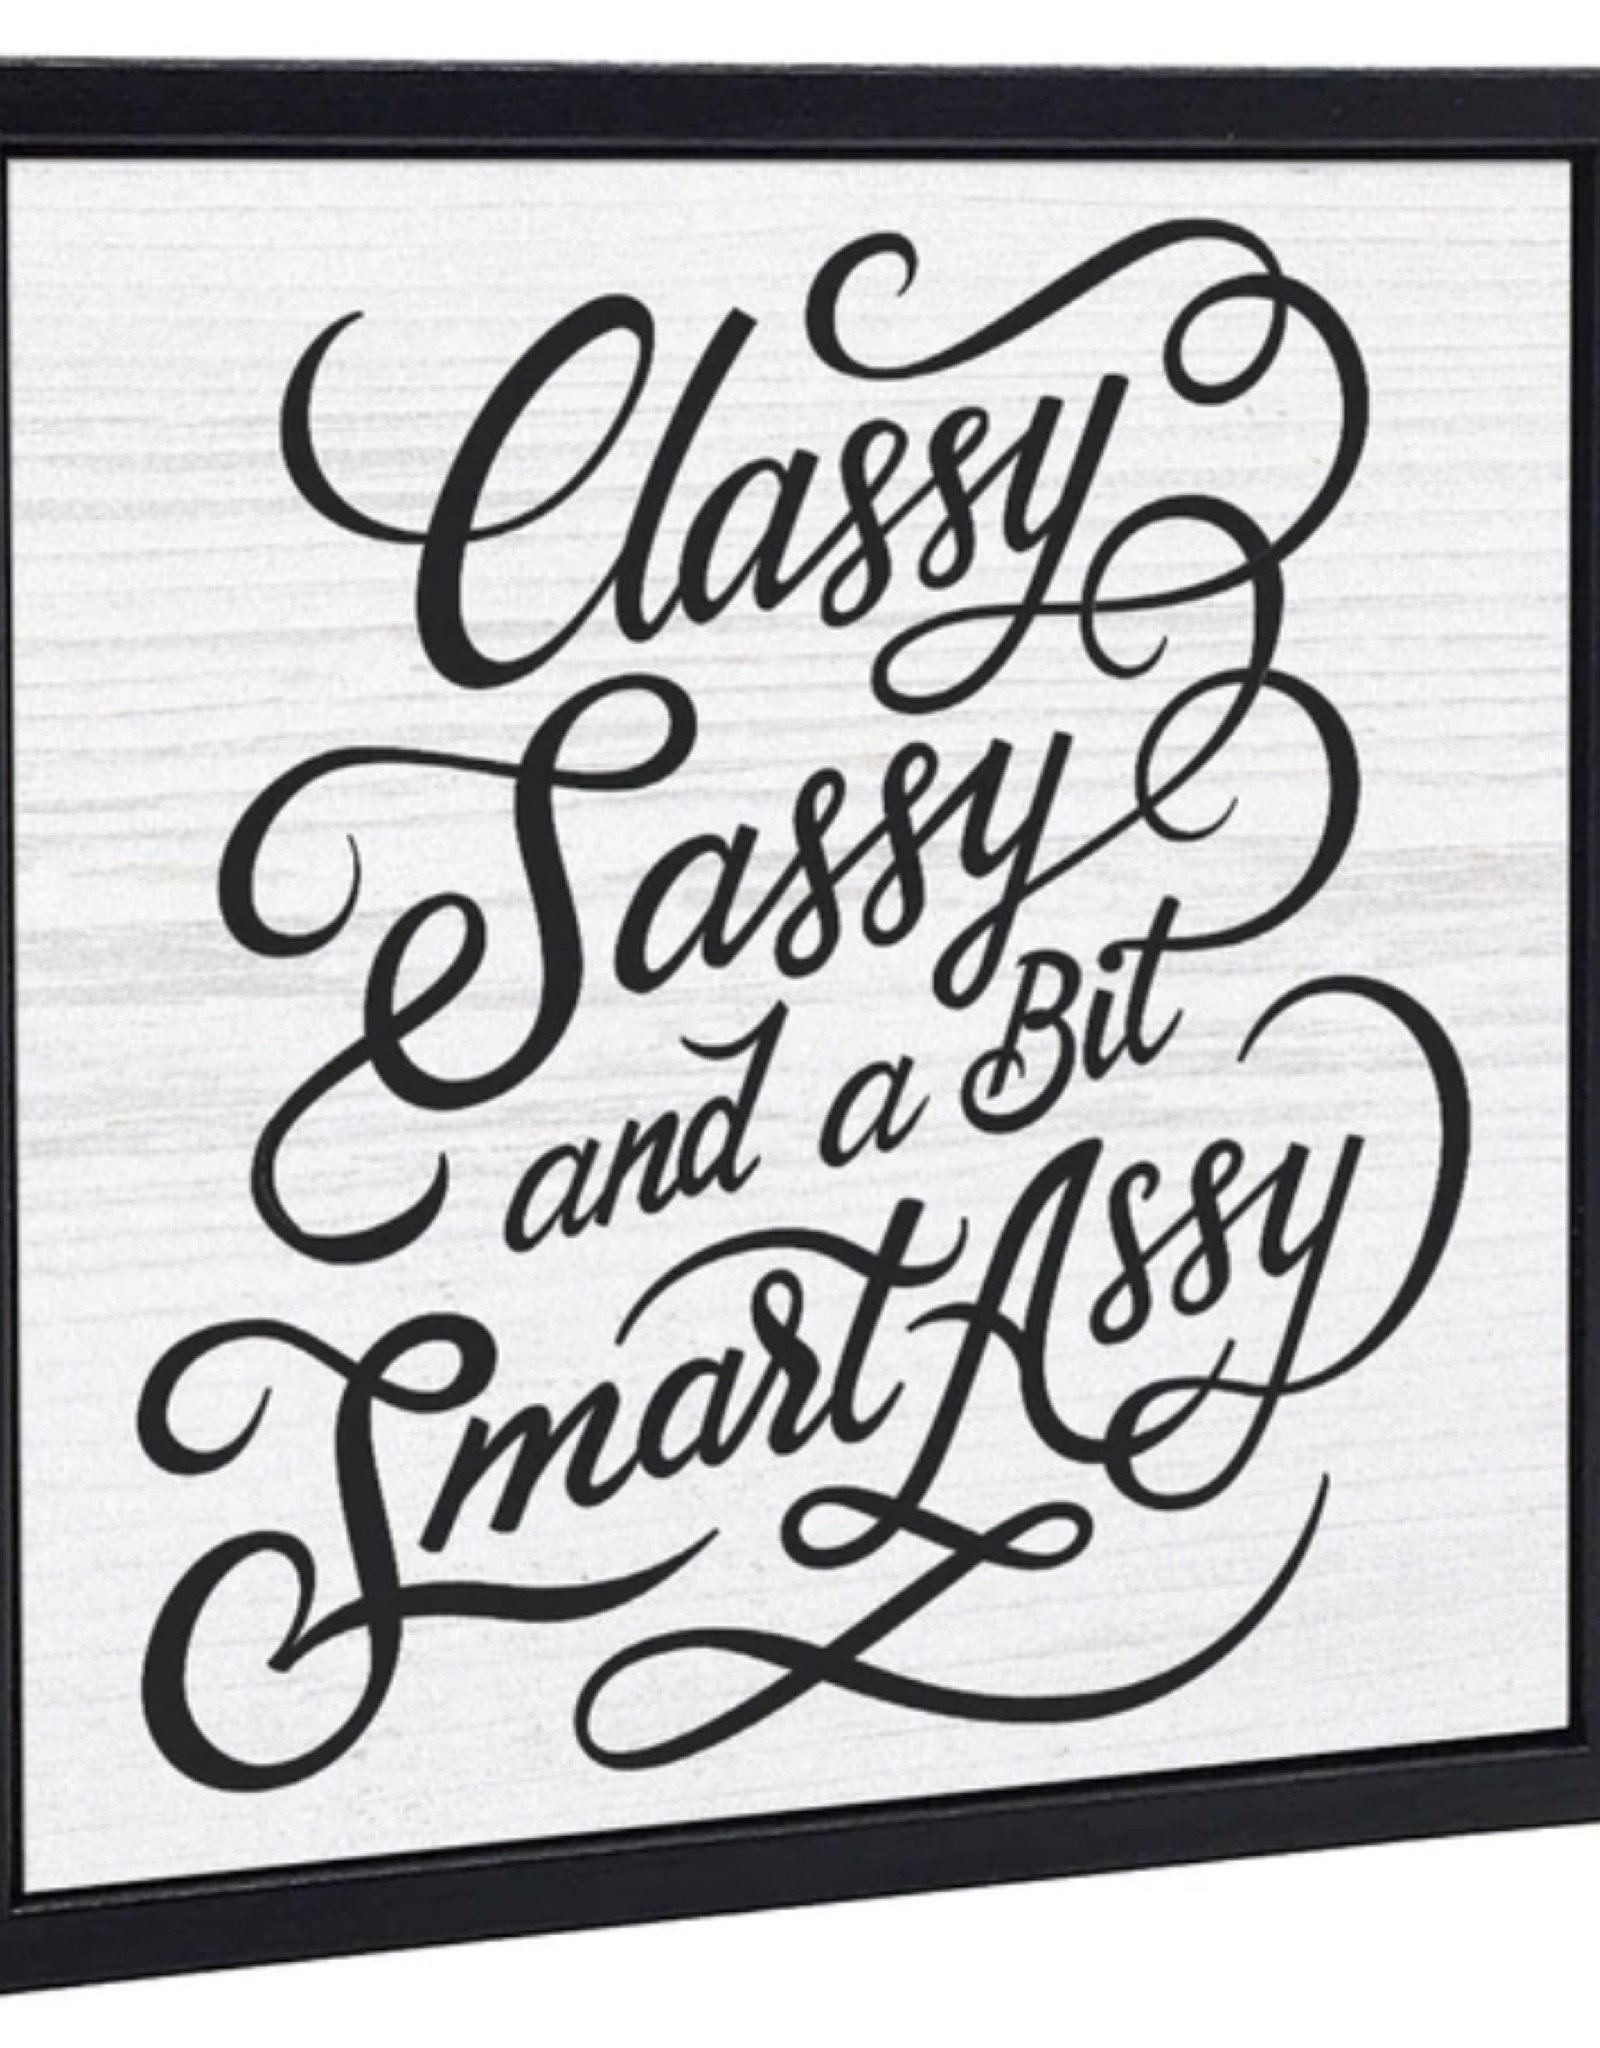 Signs Pinetree Classy Sassy And A Bit Smart Assy 032-112